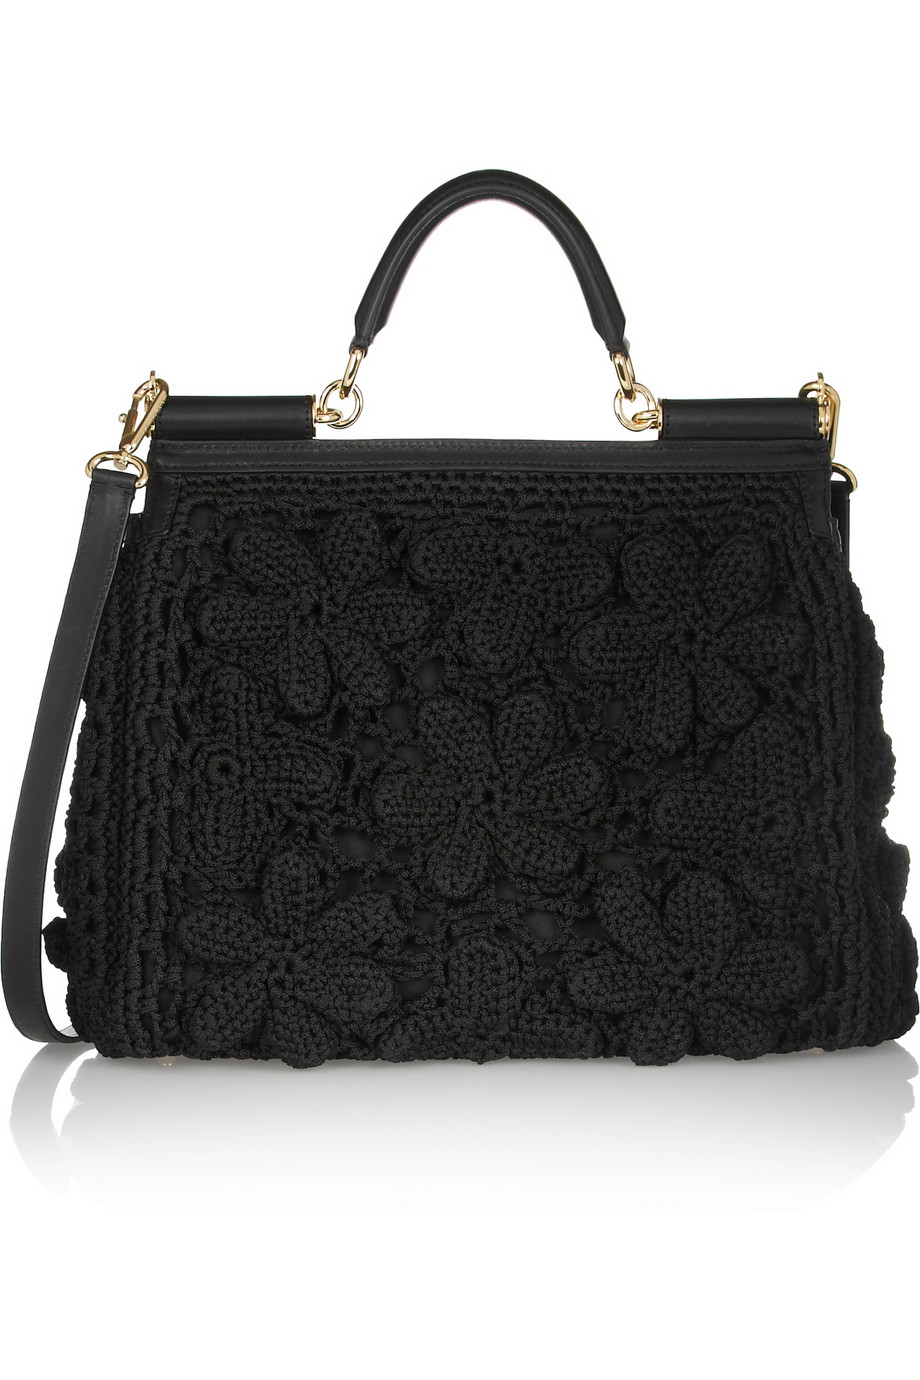 Lyst - Dolce & Gabbana Miss Sicily Crochet and Leather Shoulder Bag in ...